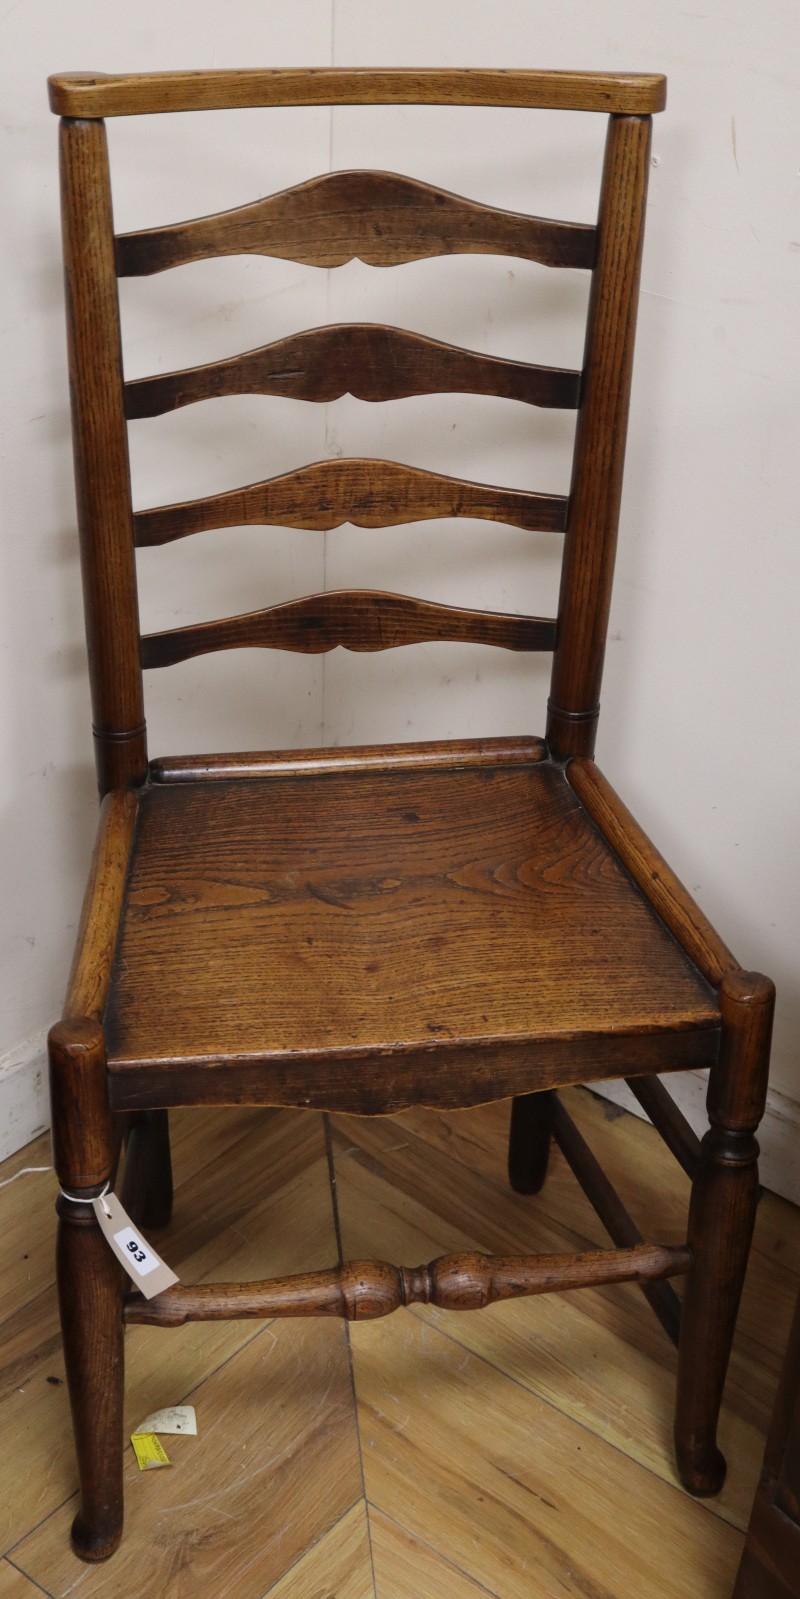 An 18th/19th century ash and elm ladder-back chair